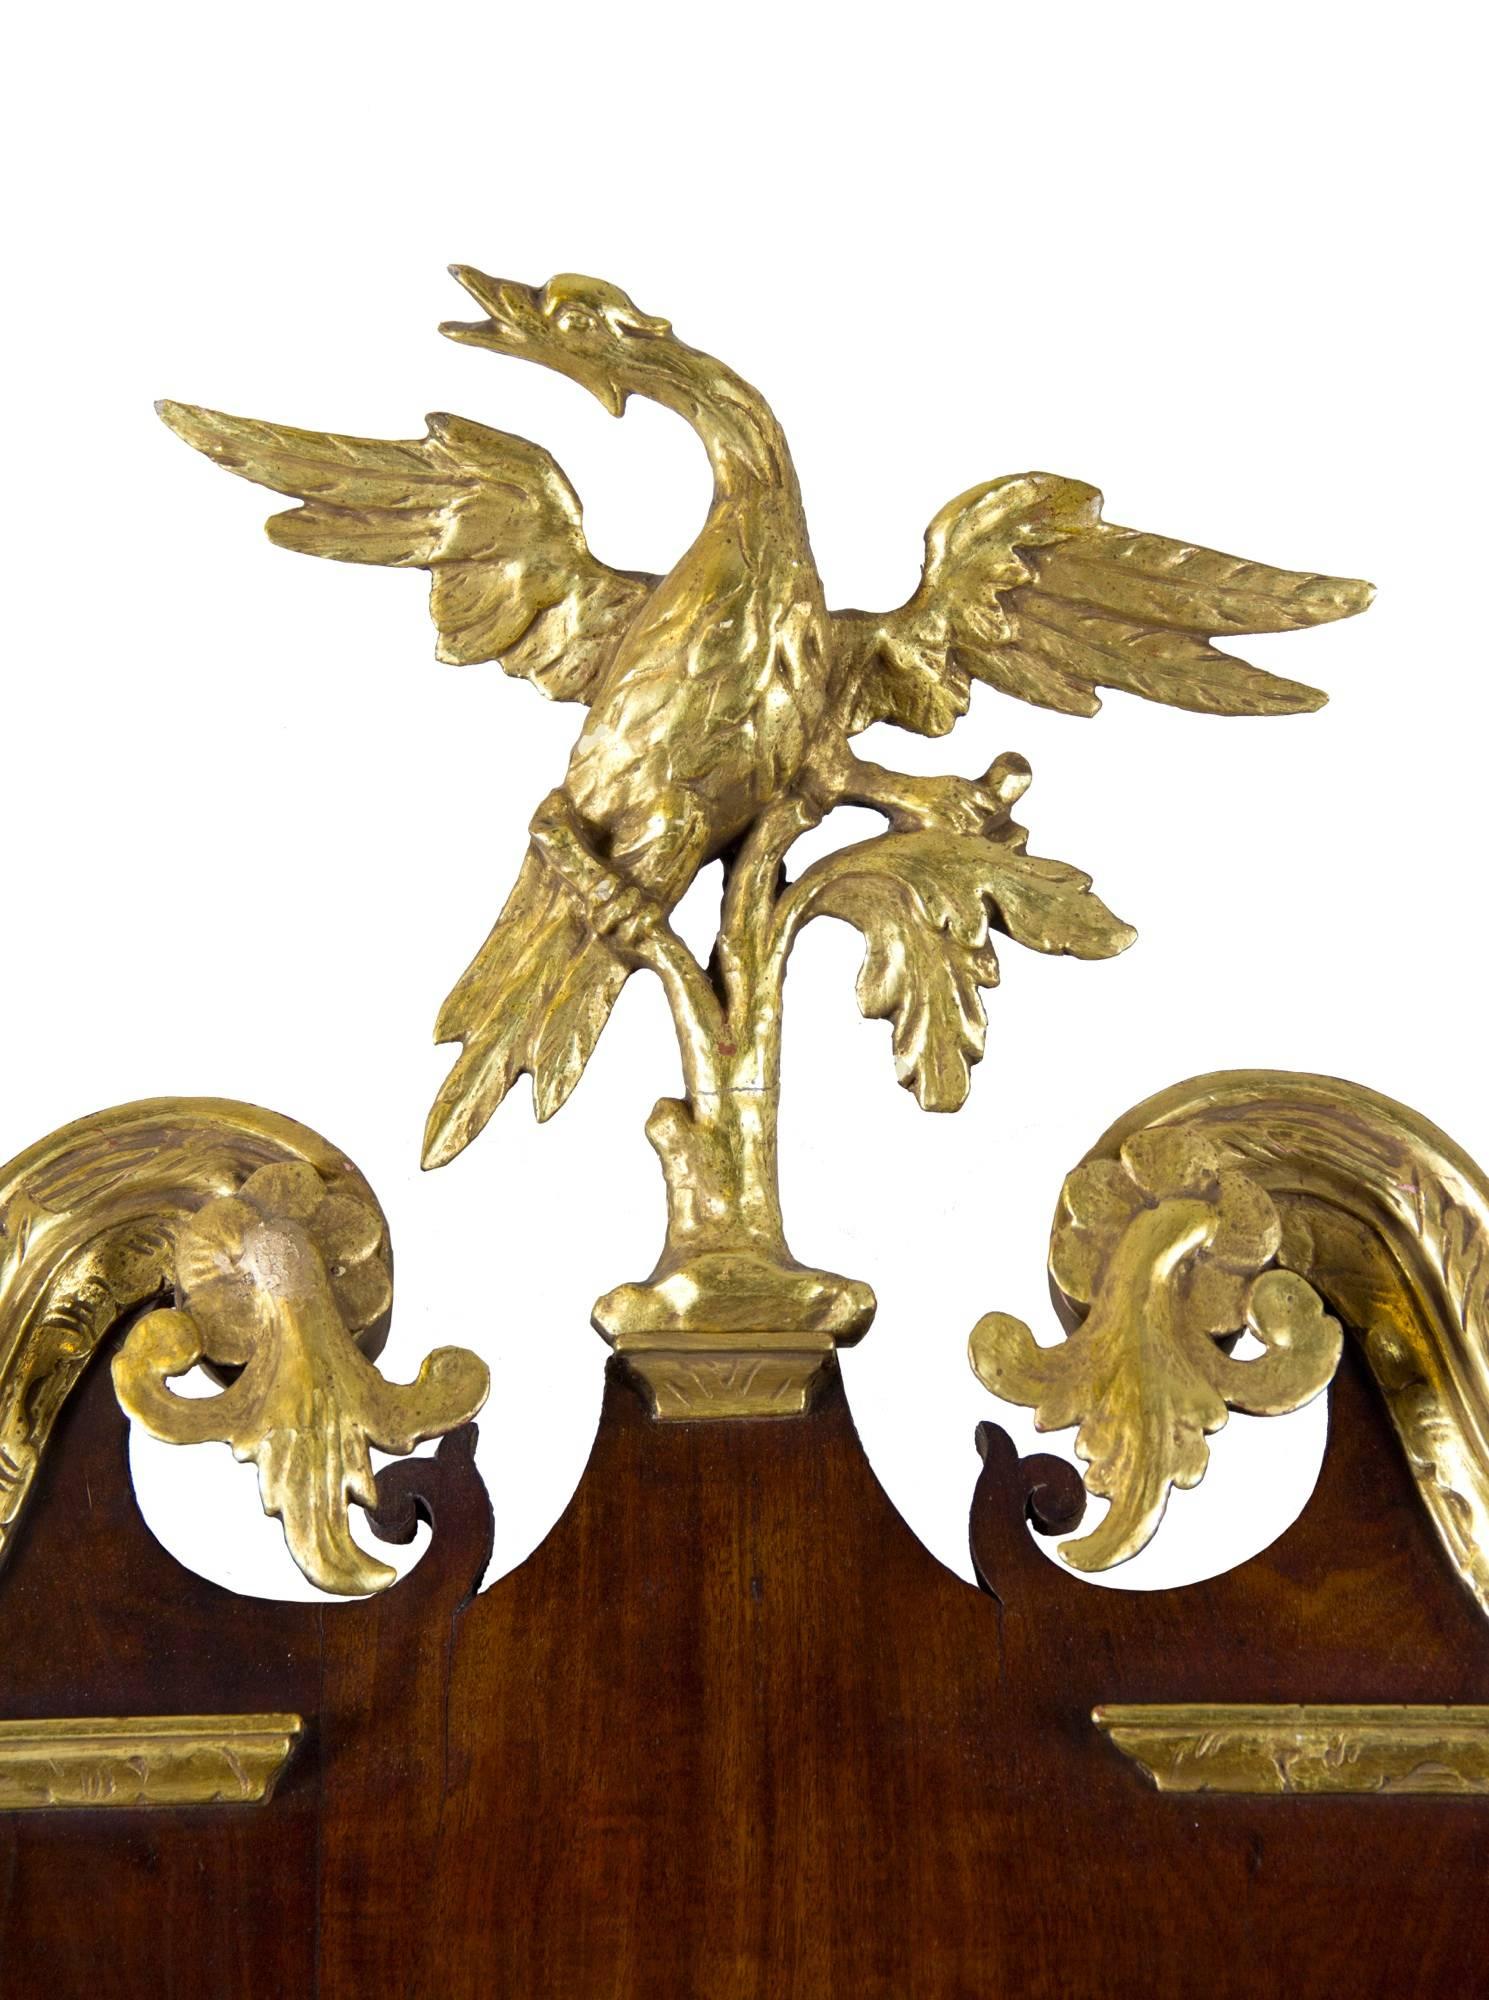 This mirror is in extremely fine condition, retaining all its original parts. The phoenix bird is beautifully carved and rarer than the eagle which is generally seen on this form. This example has all of the flourishes one expects of a high styled